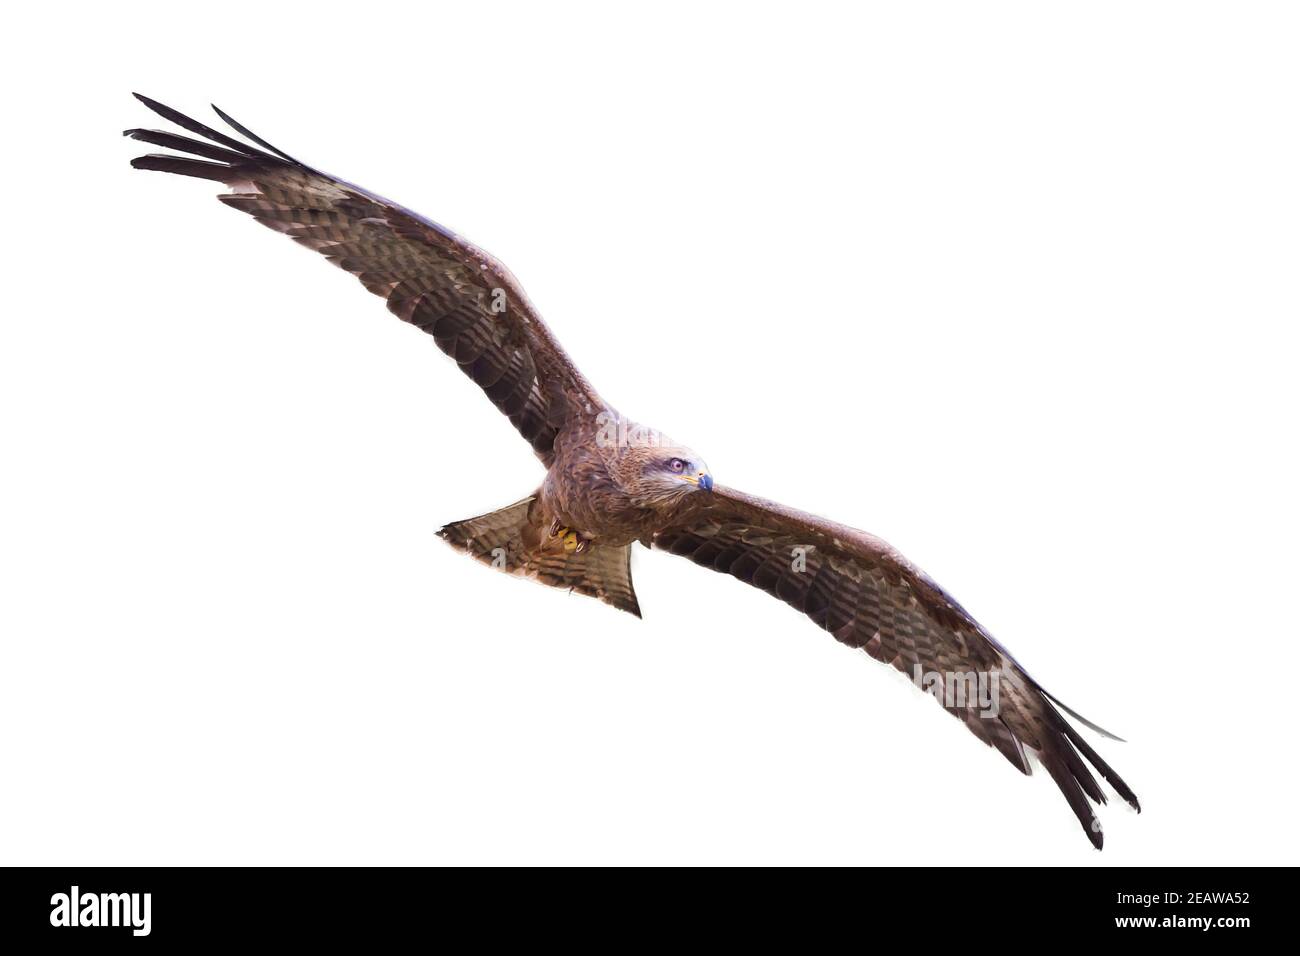 Black Kite (Milvus migrans) bird of prey raptor flying with spread wings in flight cut out and isolated Stock Photo